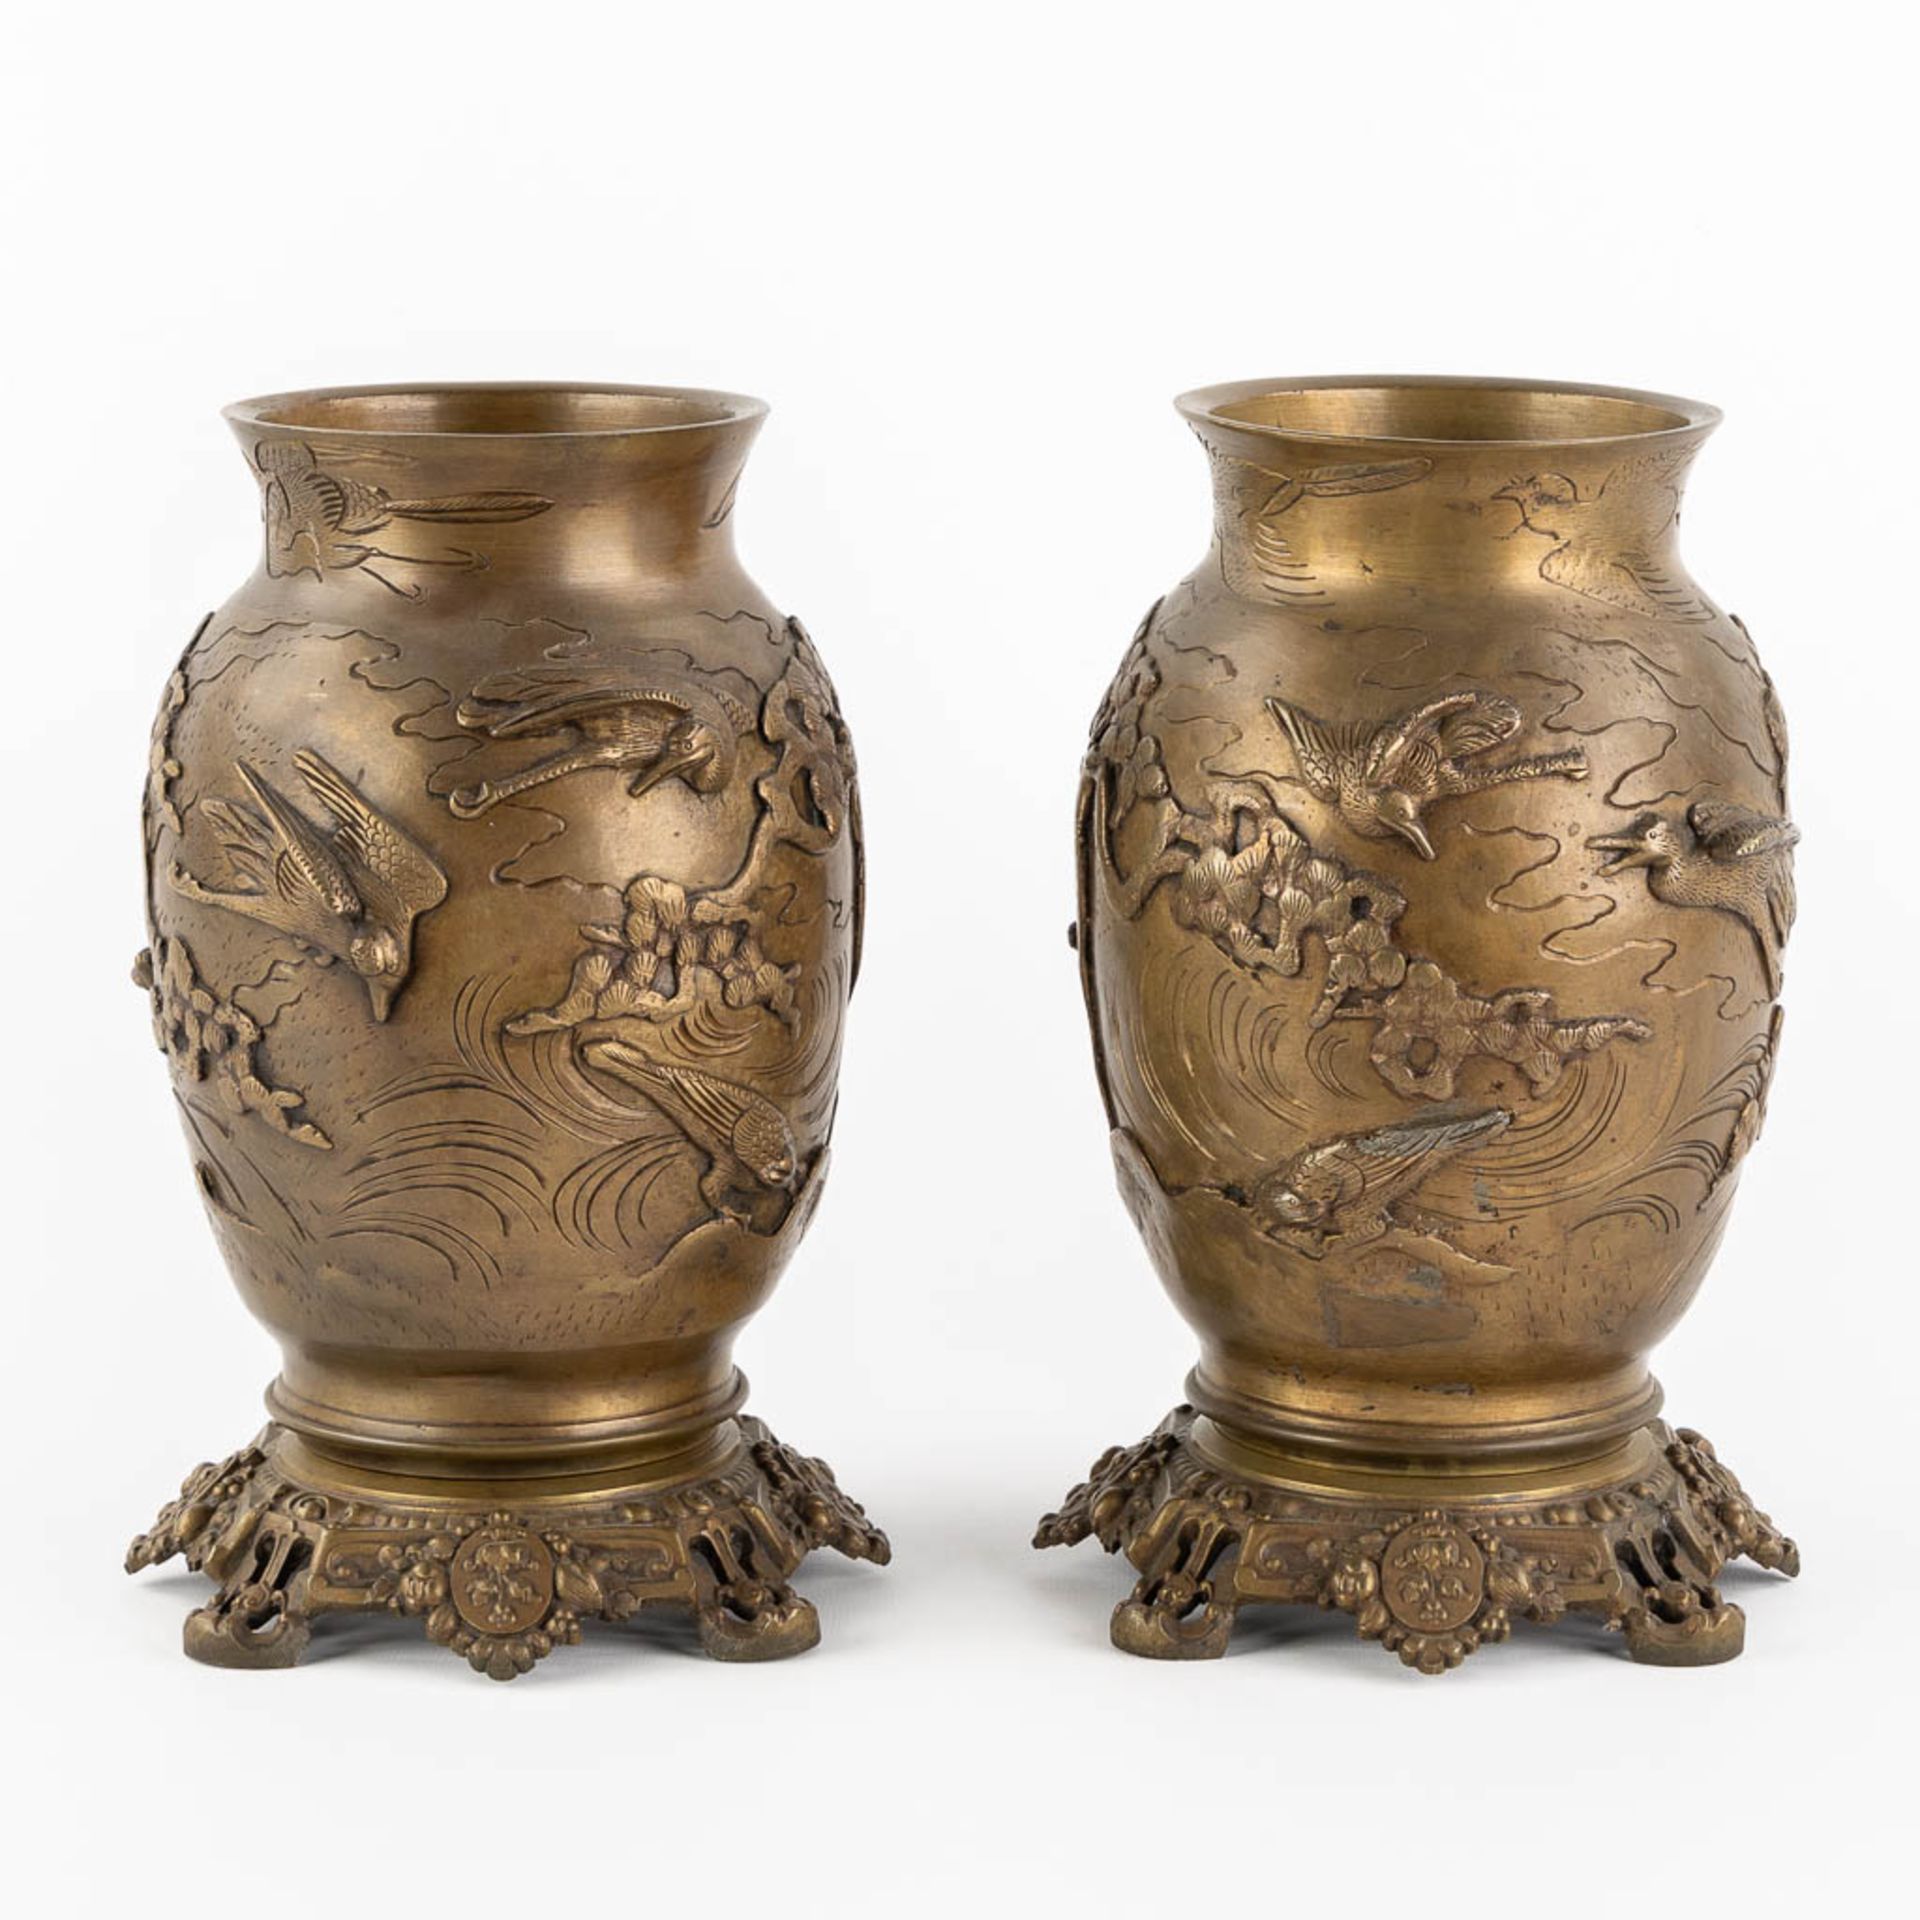 A pair of Oriental vases, depicting flying birds and trees. Patinated bronze. (H:27 x D:16 cm) - Image 4 of 16